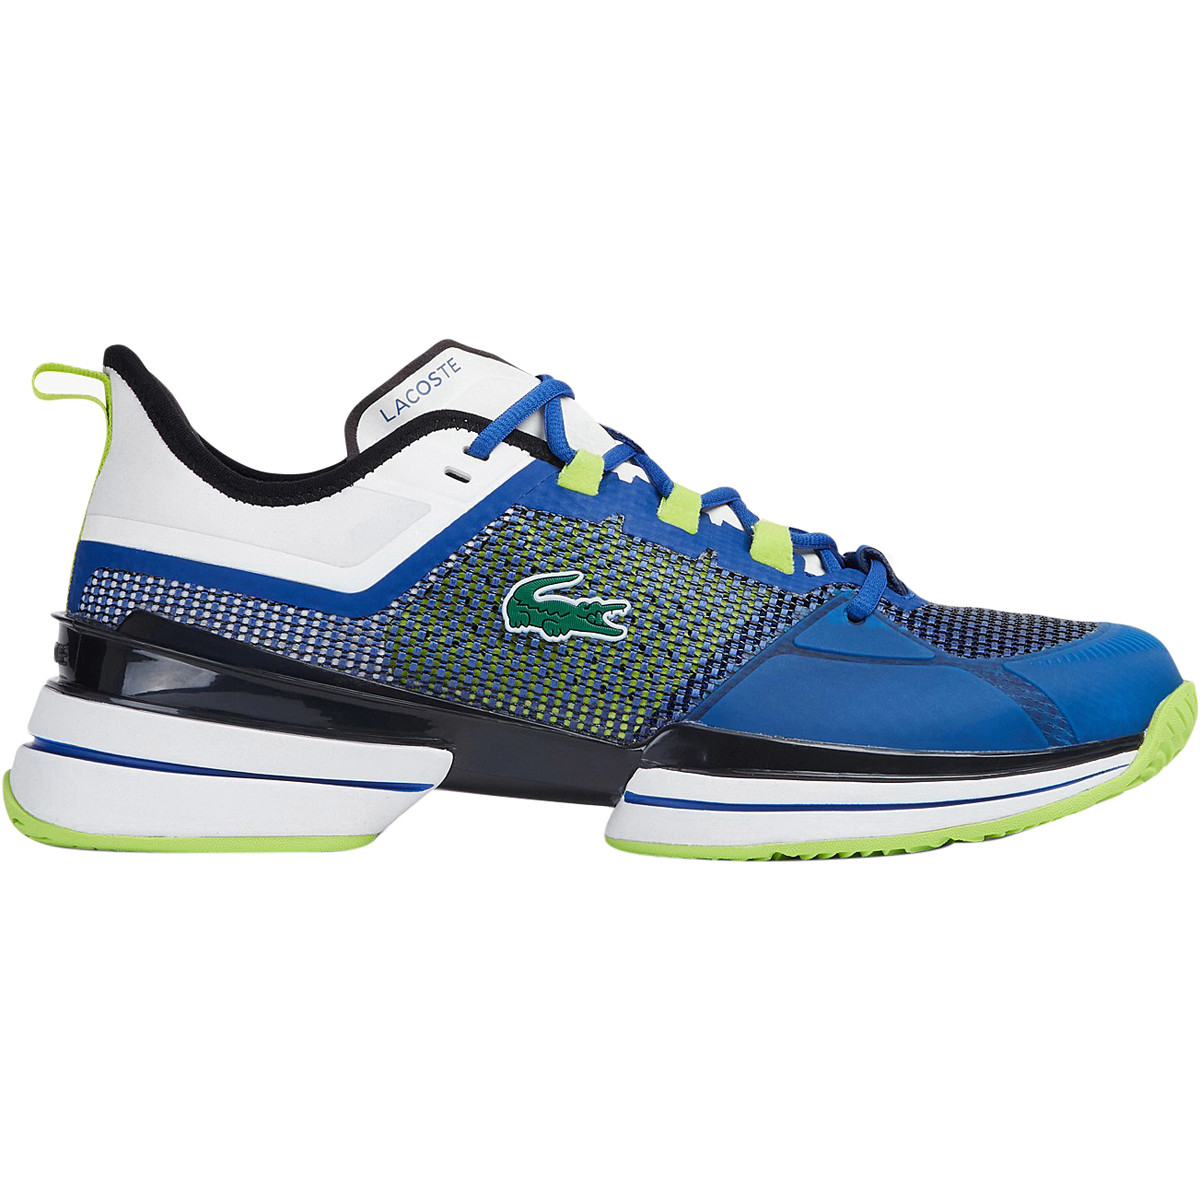 CHAUSSURES LACOSTE AG-LT ULTRA TOUTES SURFACES - LACOSTE - Homme -  Chaussures